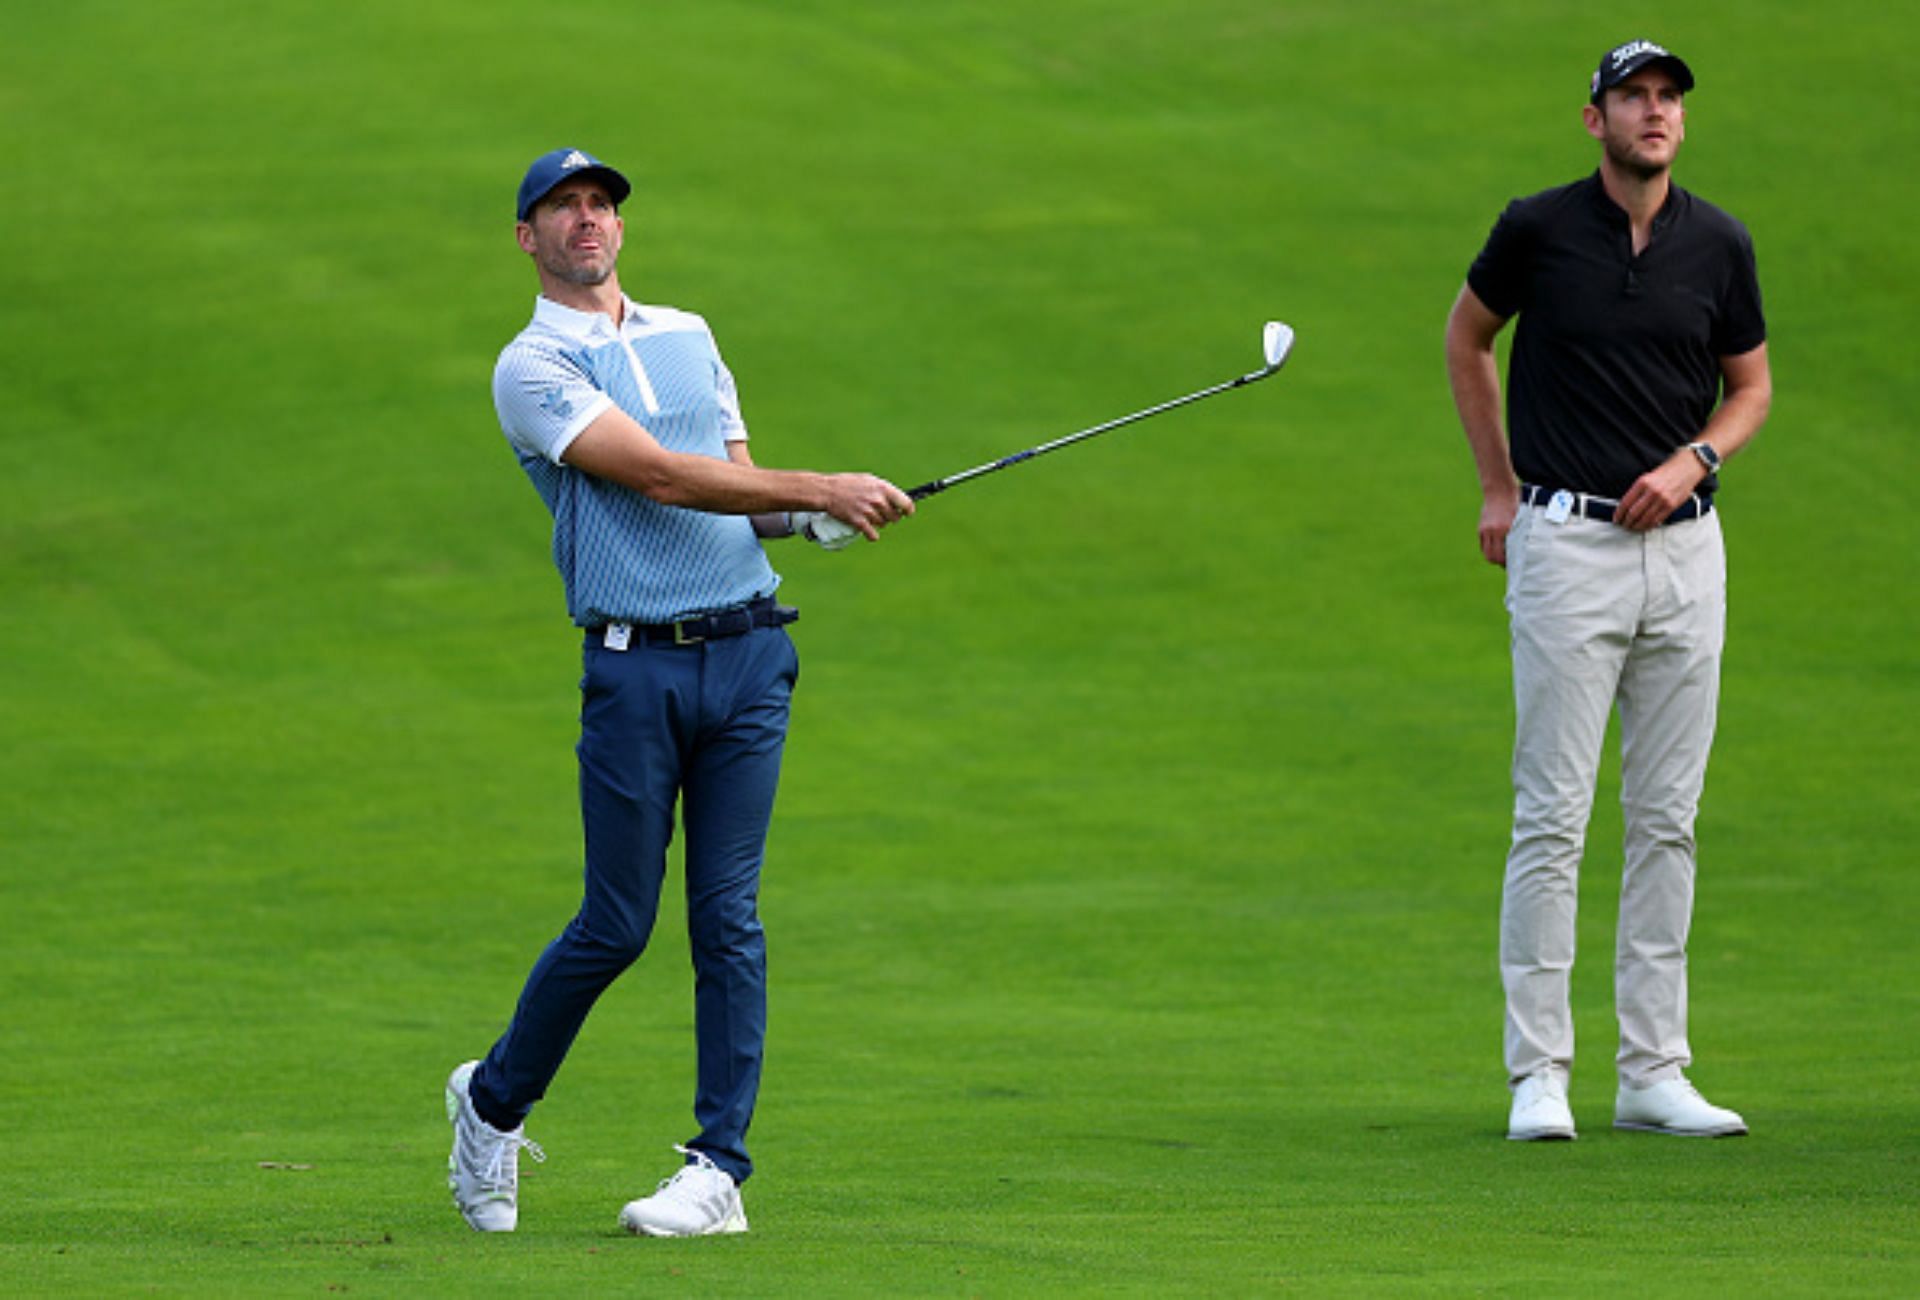 Jimmy Anderson and Stuart Broad, 2023 BMW PGA Championship Pro-Am event (Image via Getty).